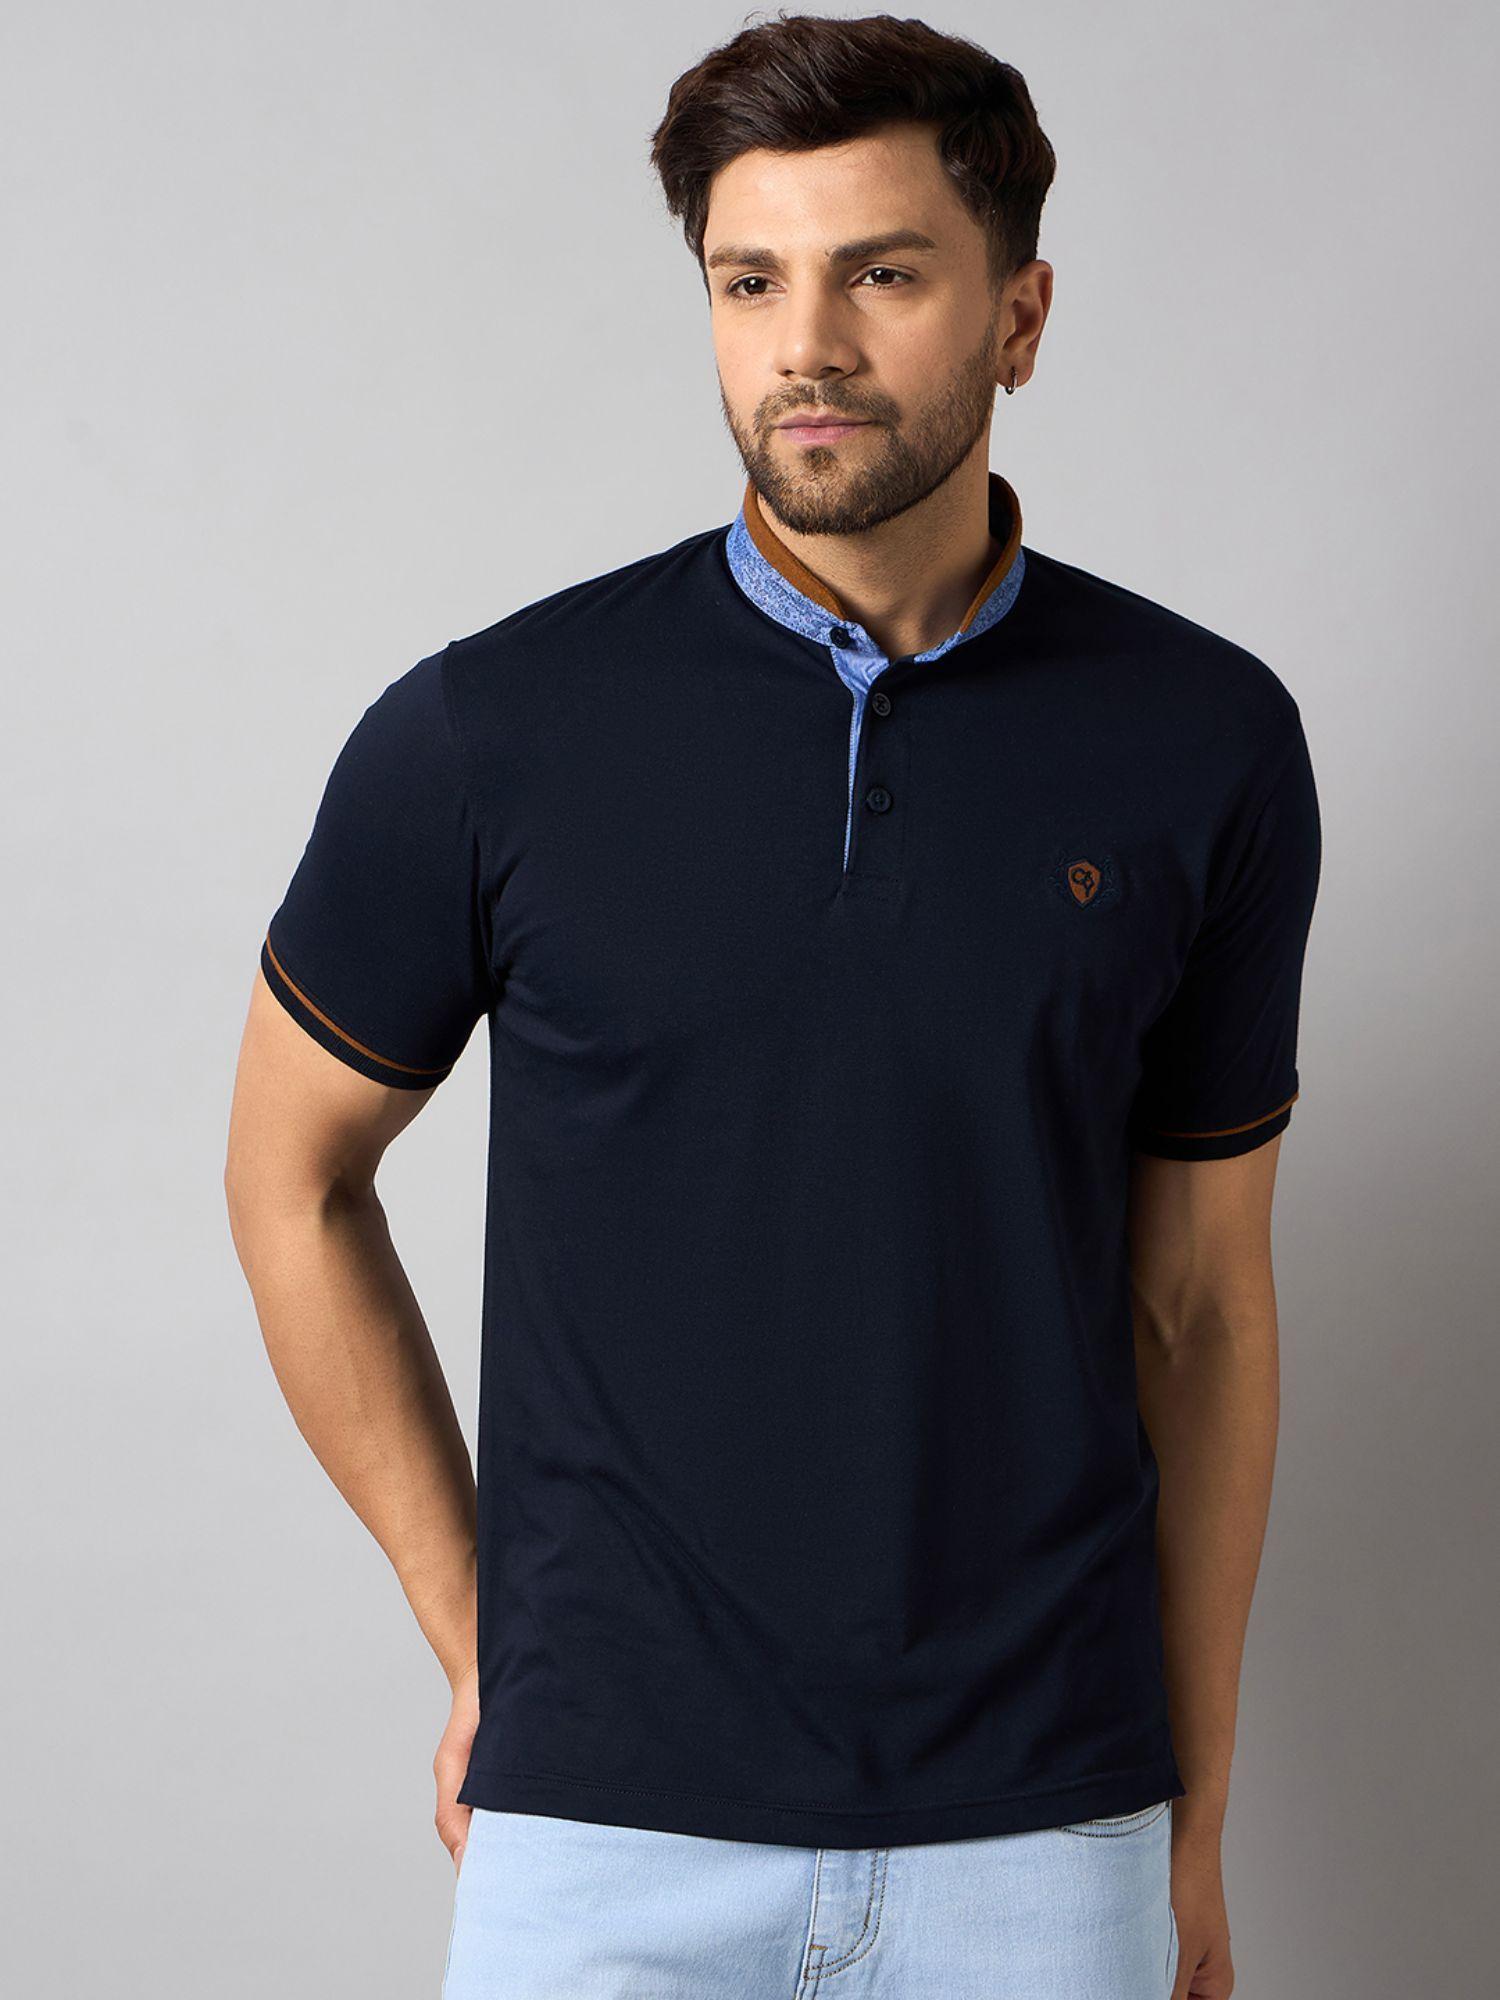 navy blue solid t-shirt